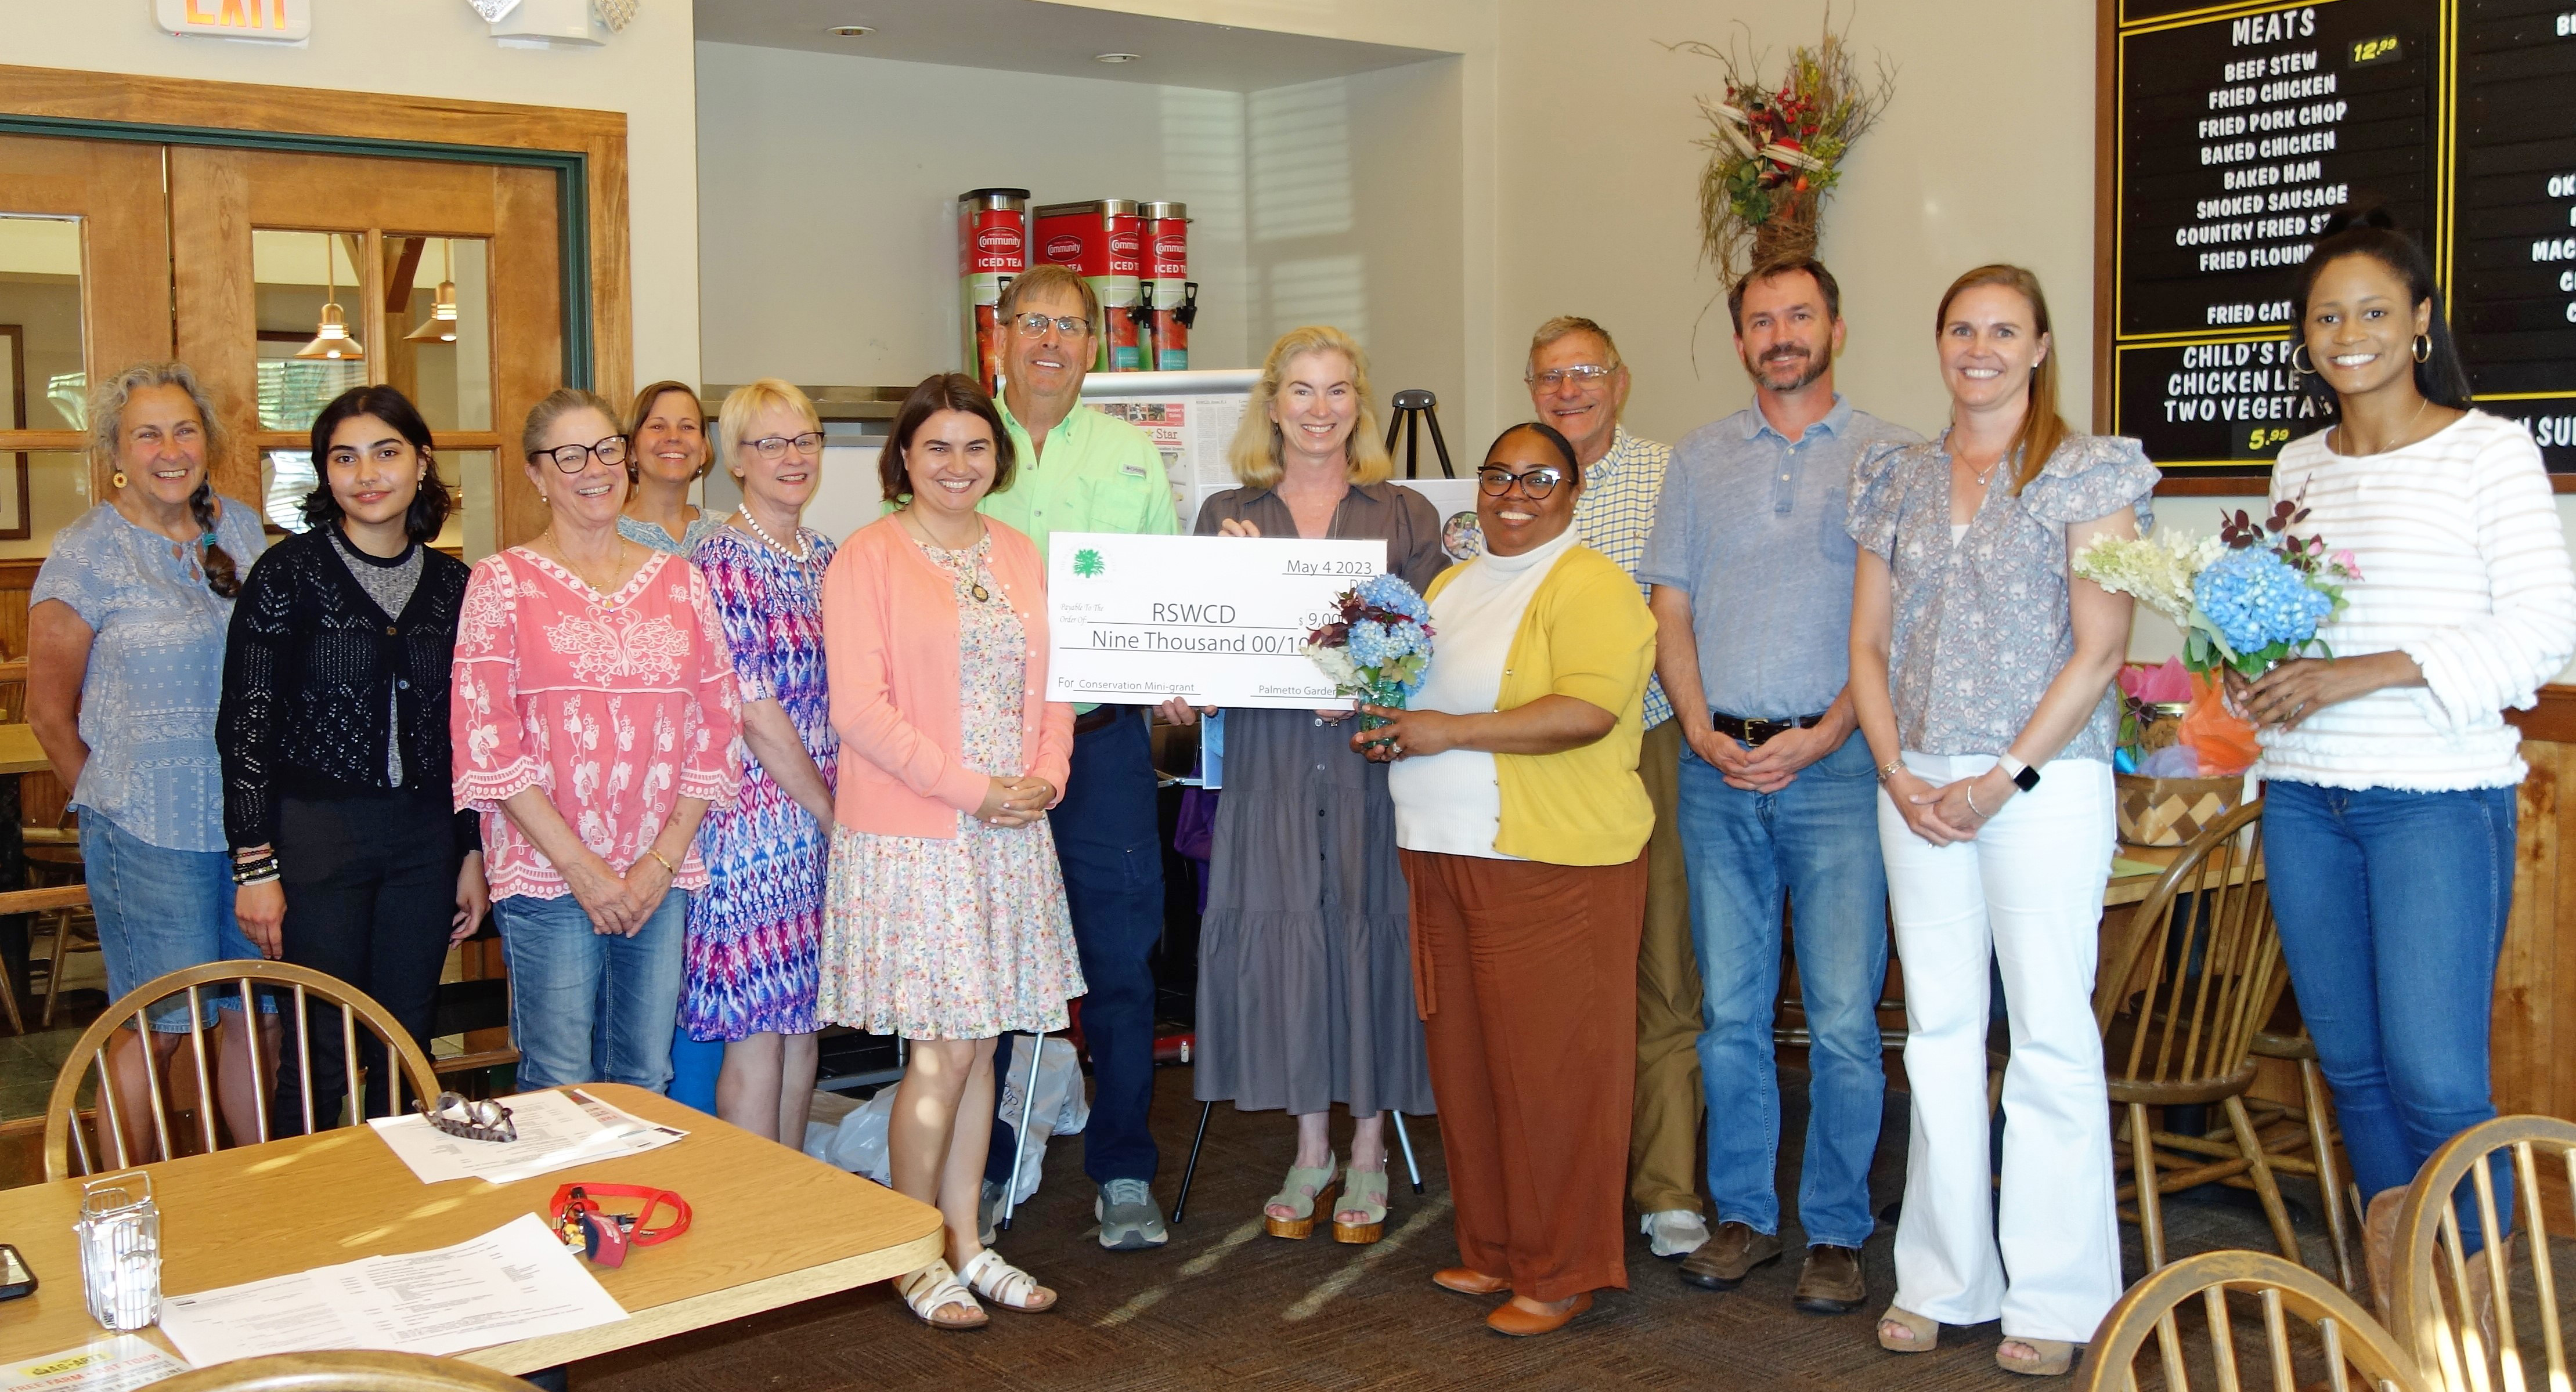 Members of the Palmetto Garden Club of South Carolina recently made a $9,000 gift to the Richland Soil and Water Conservation District to support local K-12 conservation education efforts.